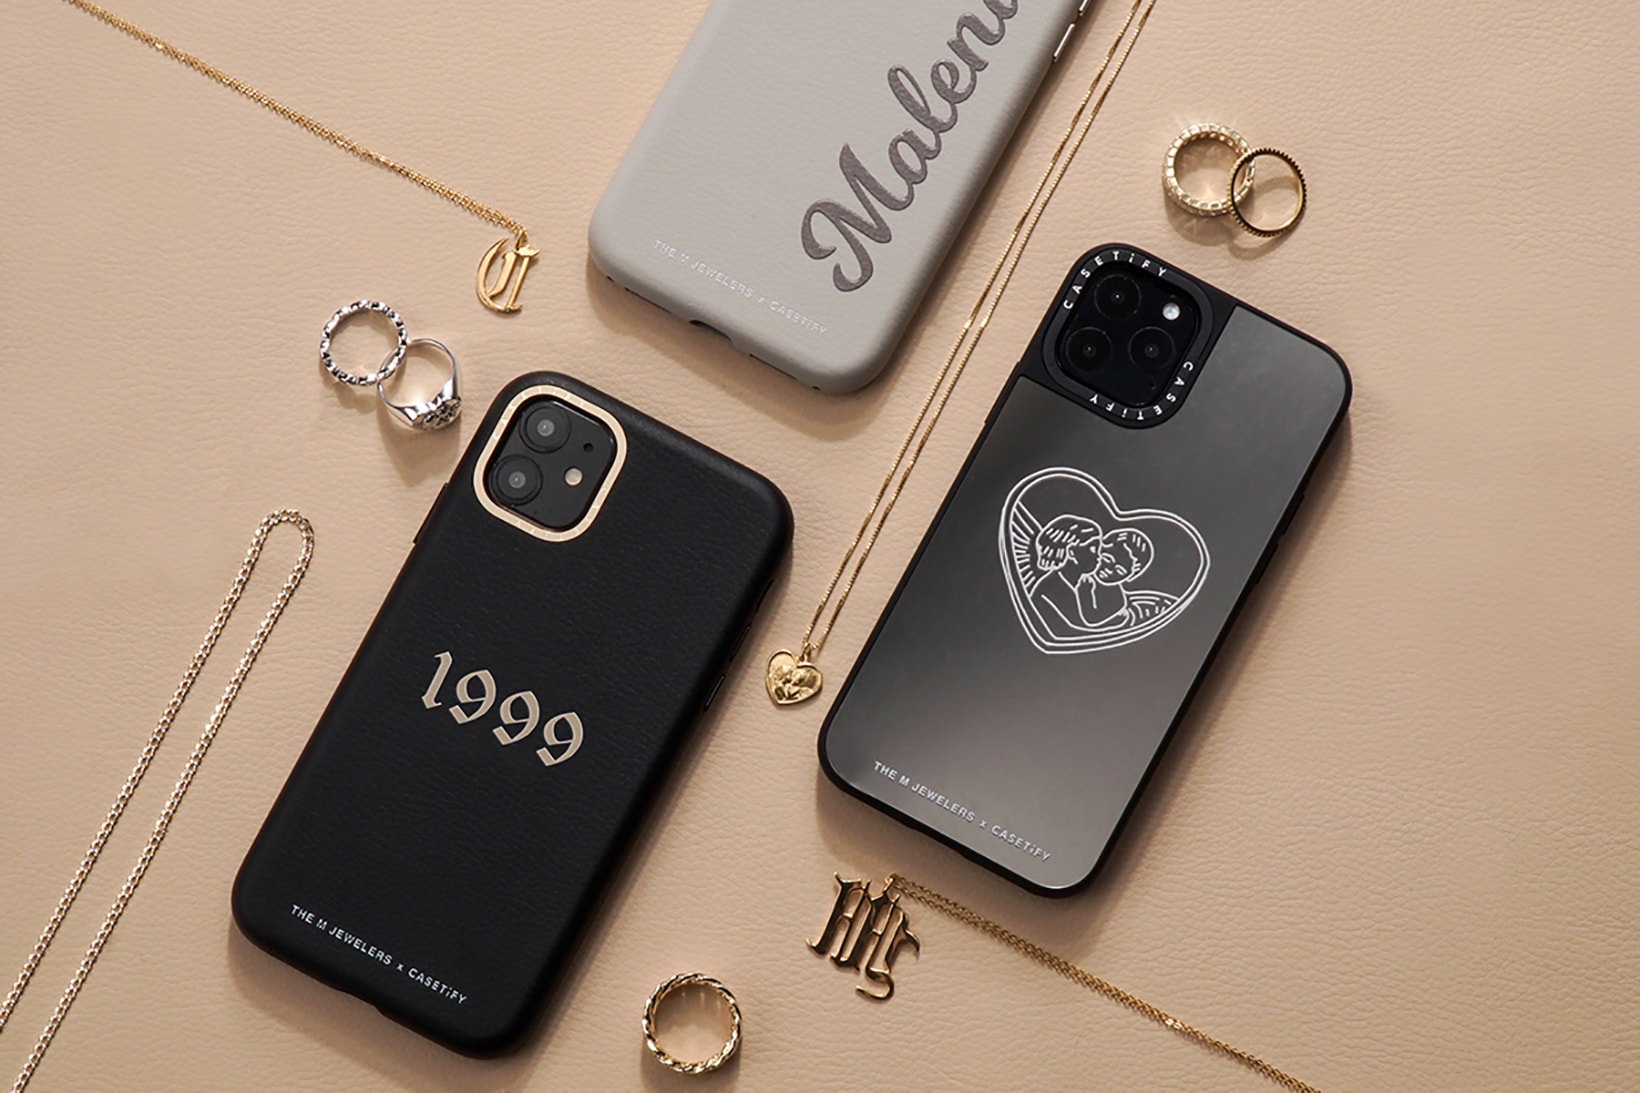 the m jewelers casetify collaboration apple iphone 11 case tech accessories rings necklaces black gold